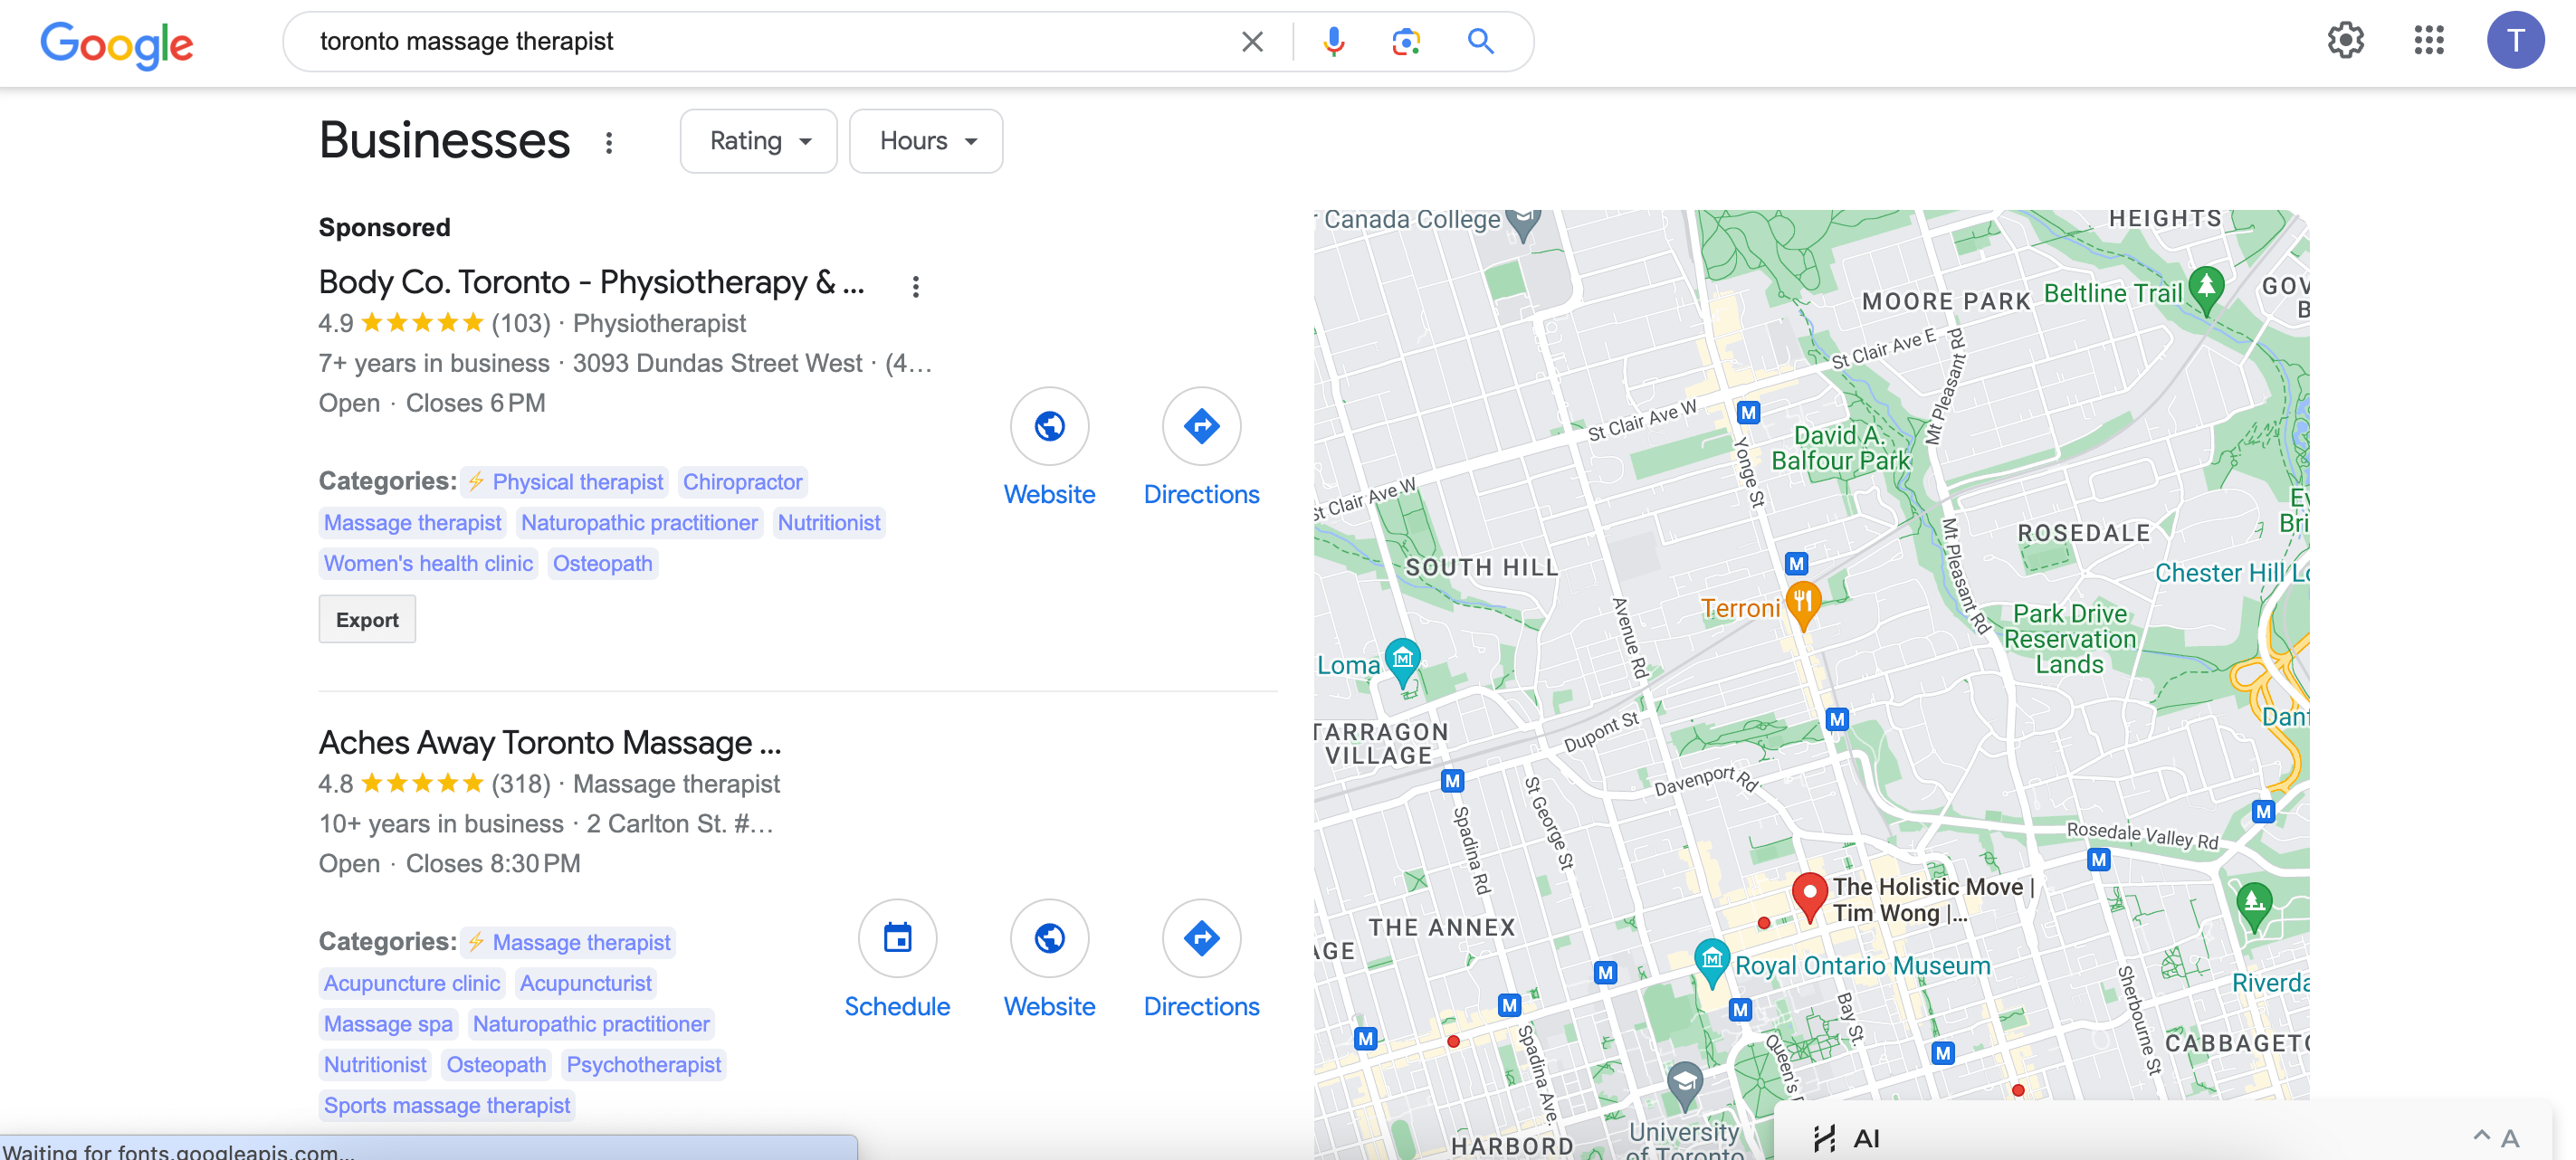 The Example of Google Business Profile ranking for Toronto massage therapist